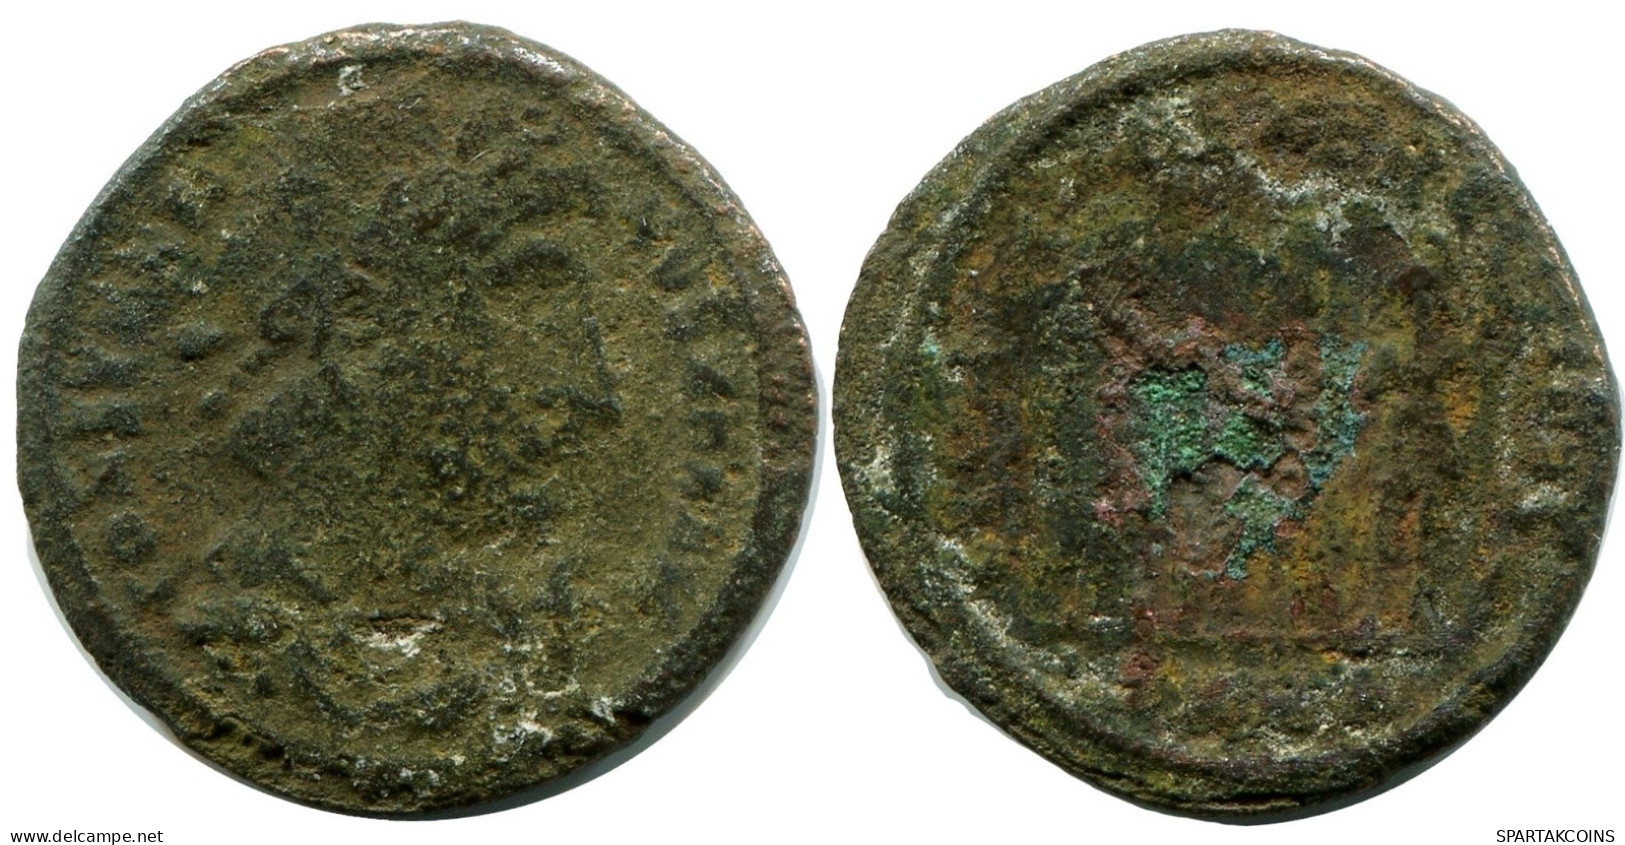 CONSTANTINE I MINTED IN HERACLEA FROM THE ROYAL ONTARIO MUSEUM #ANC11197.14.U.A - El Impero Christiano (307 / 363)